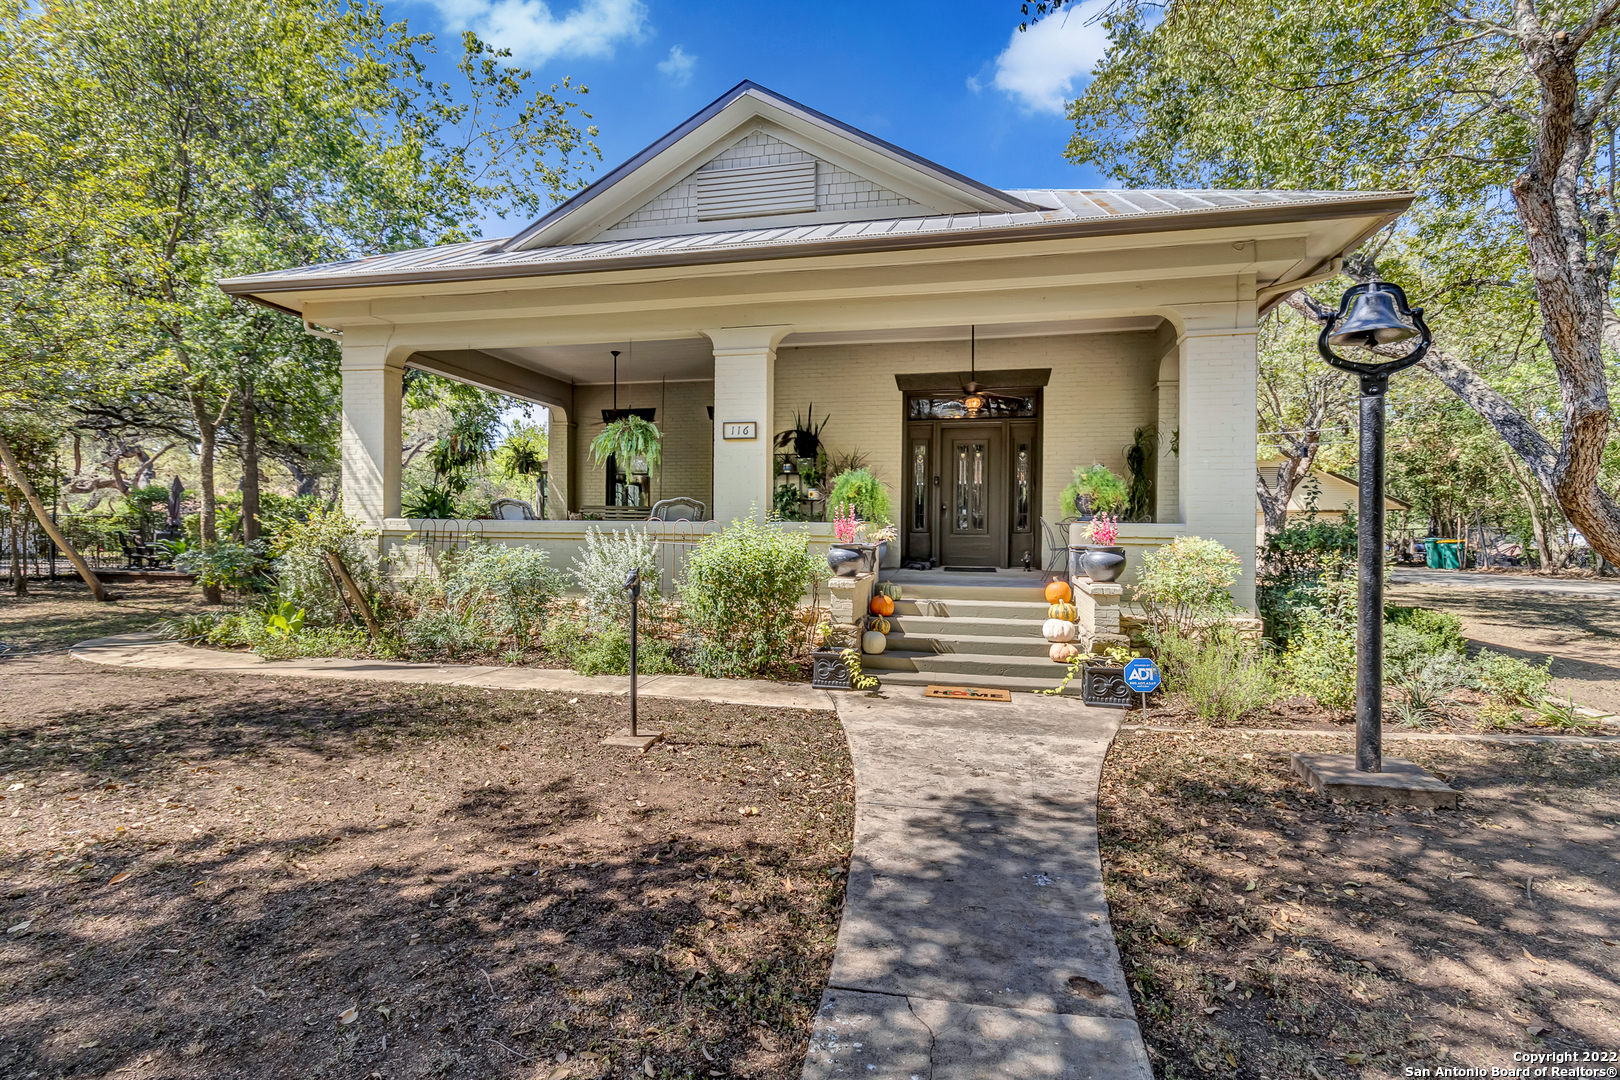 Premiere location in downtown Boerne! This home has the perfect southern living porch to gather with family & friends. If you love timeless charm & tons of character, then you have to see this beautiful, 1914 Craftsman bungalow just a block from River Road. It features architectural details galore and is an absolute favorite of locals and tourists alike. The original Ebensberger home sits elegantly behind a gated, wrought iron fence with a detailed finial post design. For fans of the beloved Arts & Crafts homes, you will find all the expected offerings, including wood-beamed, grid-paneled ceilings, warm wood floors, and an earthy, river stone fireplace with an extended, craftsman mantel. Notice the intricate newel post, gorgeous pocket doors that separate the living and dining, and the classic stained glass entry door, sidelights, and featured transom windows. The layout of this amazing historic home lends itself to flexible styling and livability as a one or one-and-a-half-story. The owner's suite and secondary bedroom are both on the first floor, as well as a full bath with black and white, hexagon mosaic tile, claw foot tub, pedestal sink, and original built-in mirrored cabinet. There is an air-conditioned sleeping porch just off the second bedroom, plus a den/library/office at the back of the house with bookshelves that flank the entire wall and look over the pool and backyard. The charming kitchen has maintained the bungalow's integrity with old-world custom cabinets, see-through glass fronts, and a copper farm sink. Included in the square footage is approximately 530 sq. ft. in the finished attic. It could be used as a potential third/fourth bedroom, game room, or a perfect getaway space for guests with its cozy wood stove and full bath. Great potential here also for a Bed and Breakfast or possible short-term rental. This historic estate home is just one long block from River Road, Cibolo Creek, walking trails, and ducks by the dozen. Enjoy Boerne's live music, restaurants, and shopping galore, just a short distance from your relaxing front porch. If you love entertaining, lounging by the pool, food with friends, and parties in the cabana, check this one out. Also has a great 3/4 car garage/workshop, and greenhouse. There's something here for everyone.